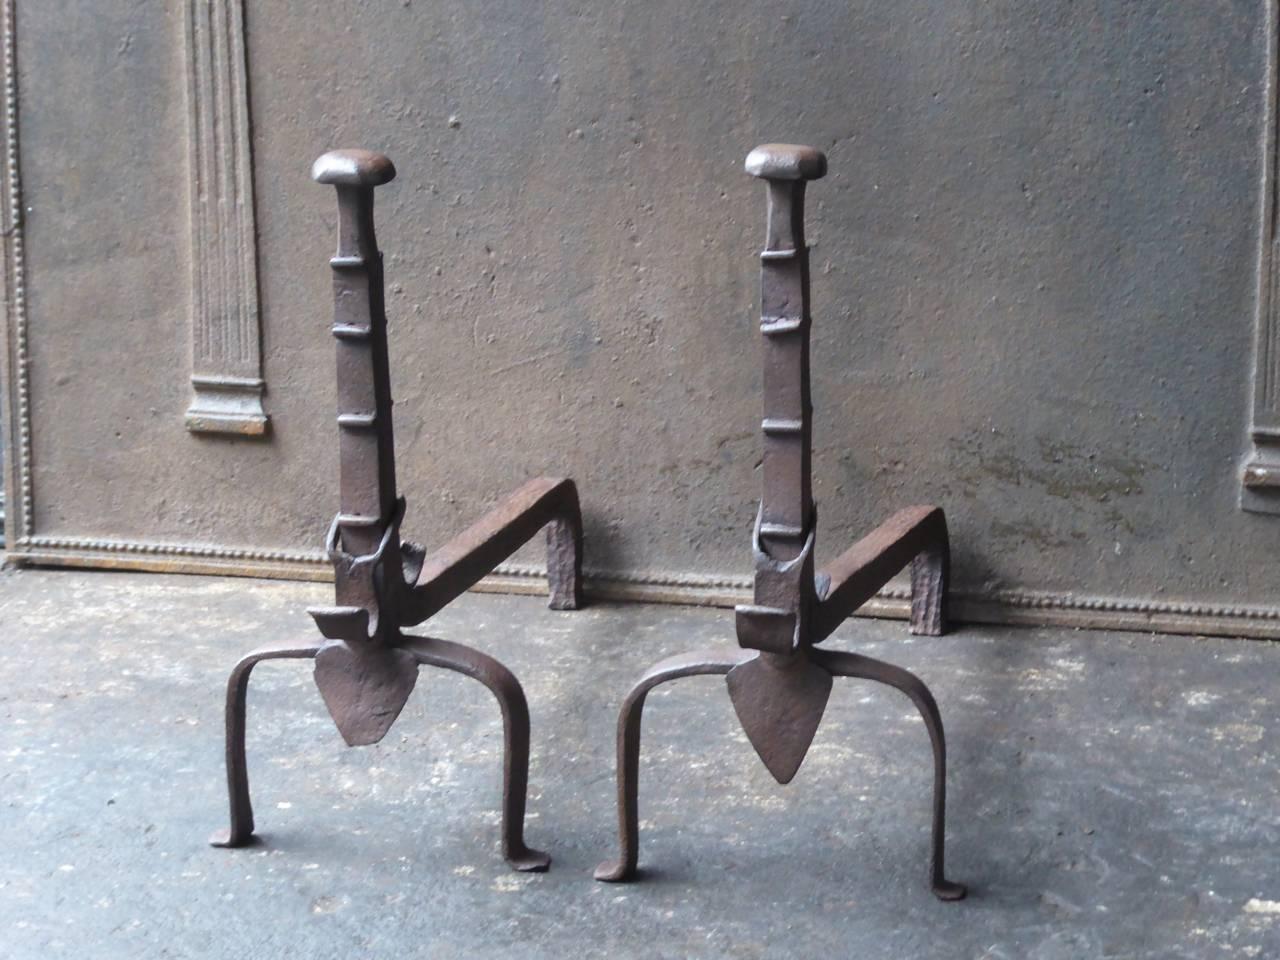 18th-19th century French fire dogs made of wrought iron.

We have a unique and specialized collection of antique and used fireplace accessories consisting of more than 1000 listings at 1stdibs. Amongst others, we always have 300+ firebacks, 250+